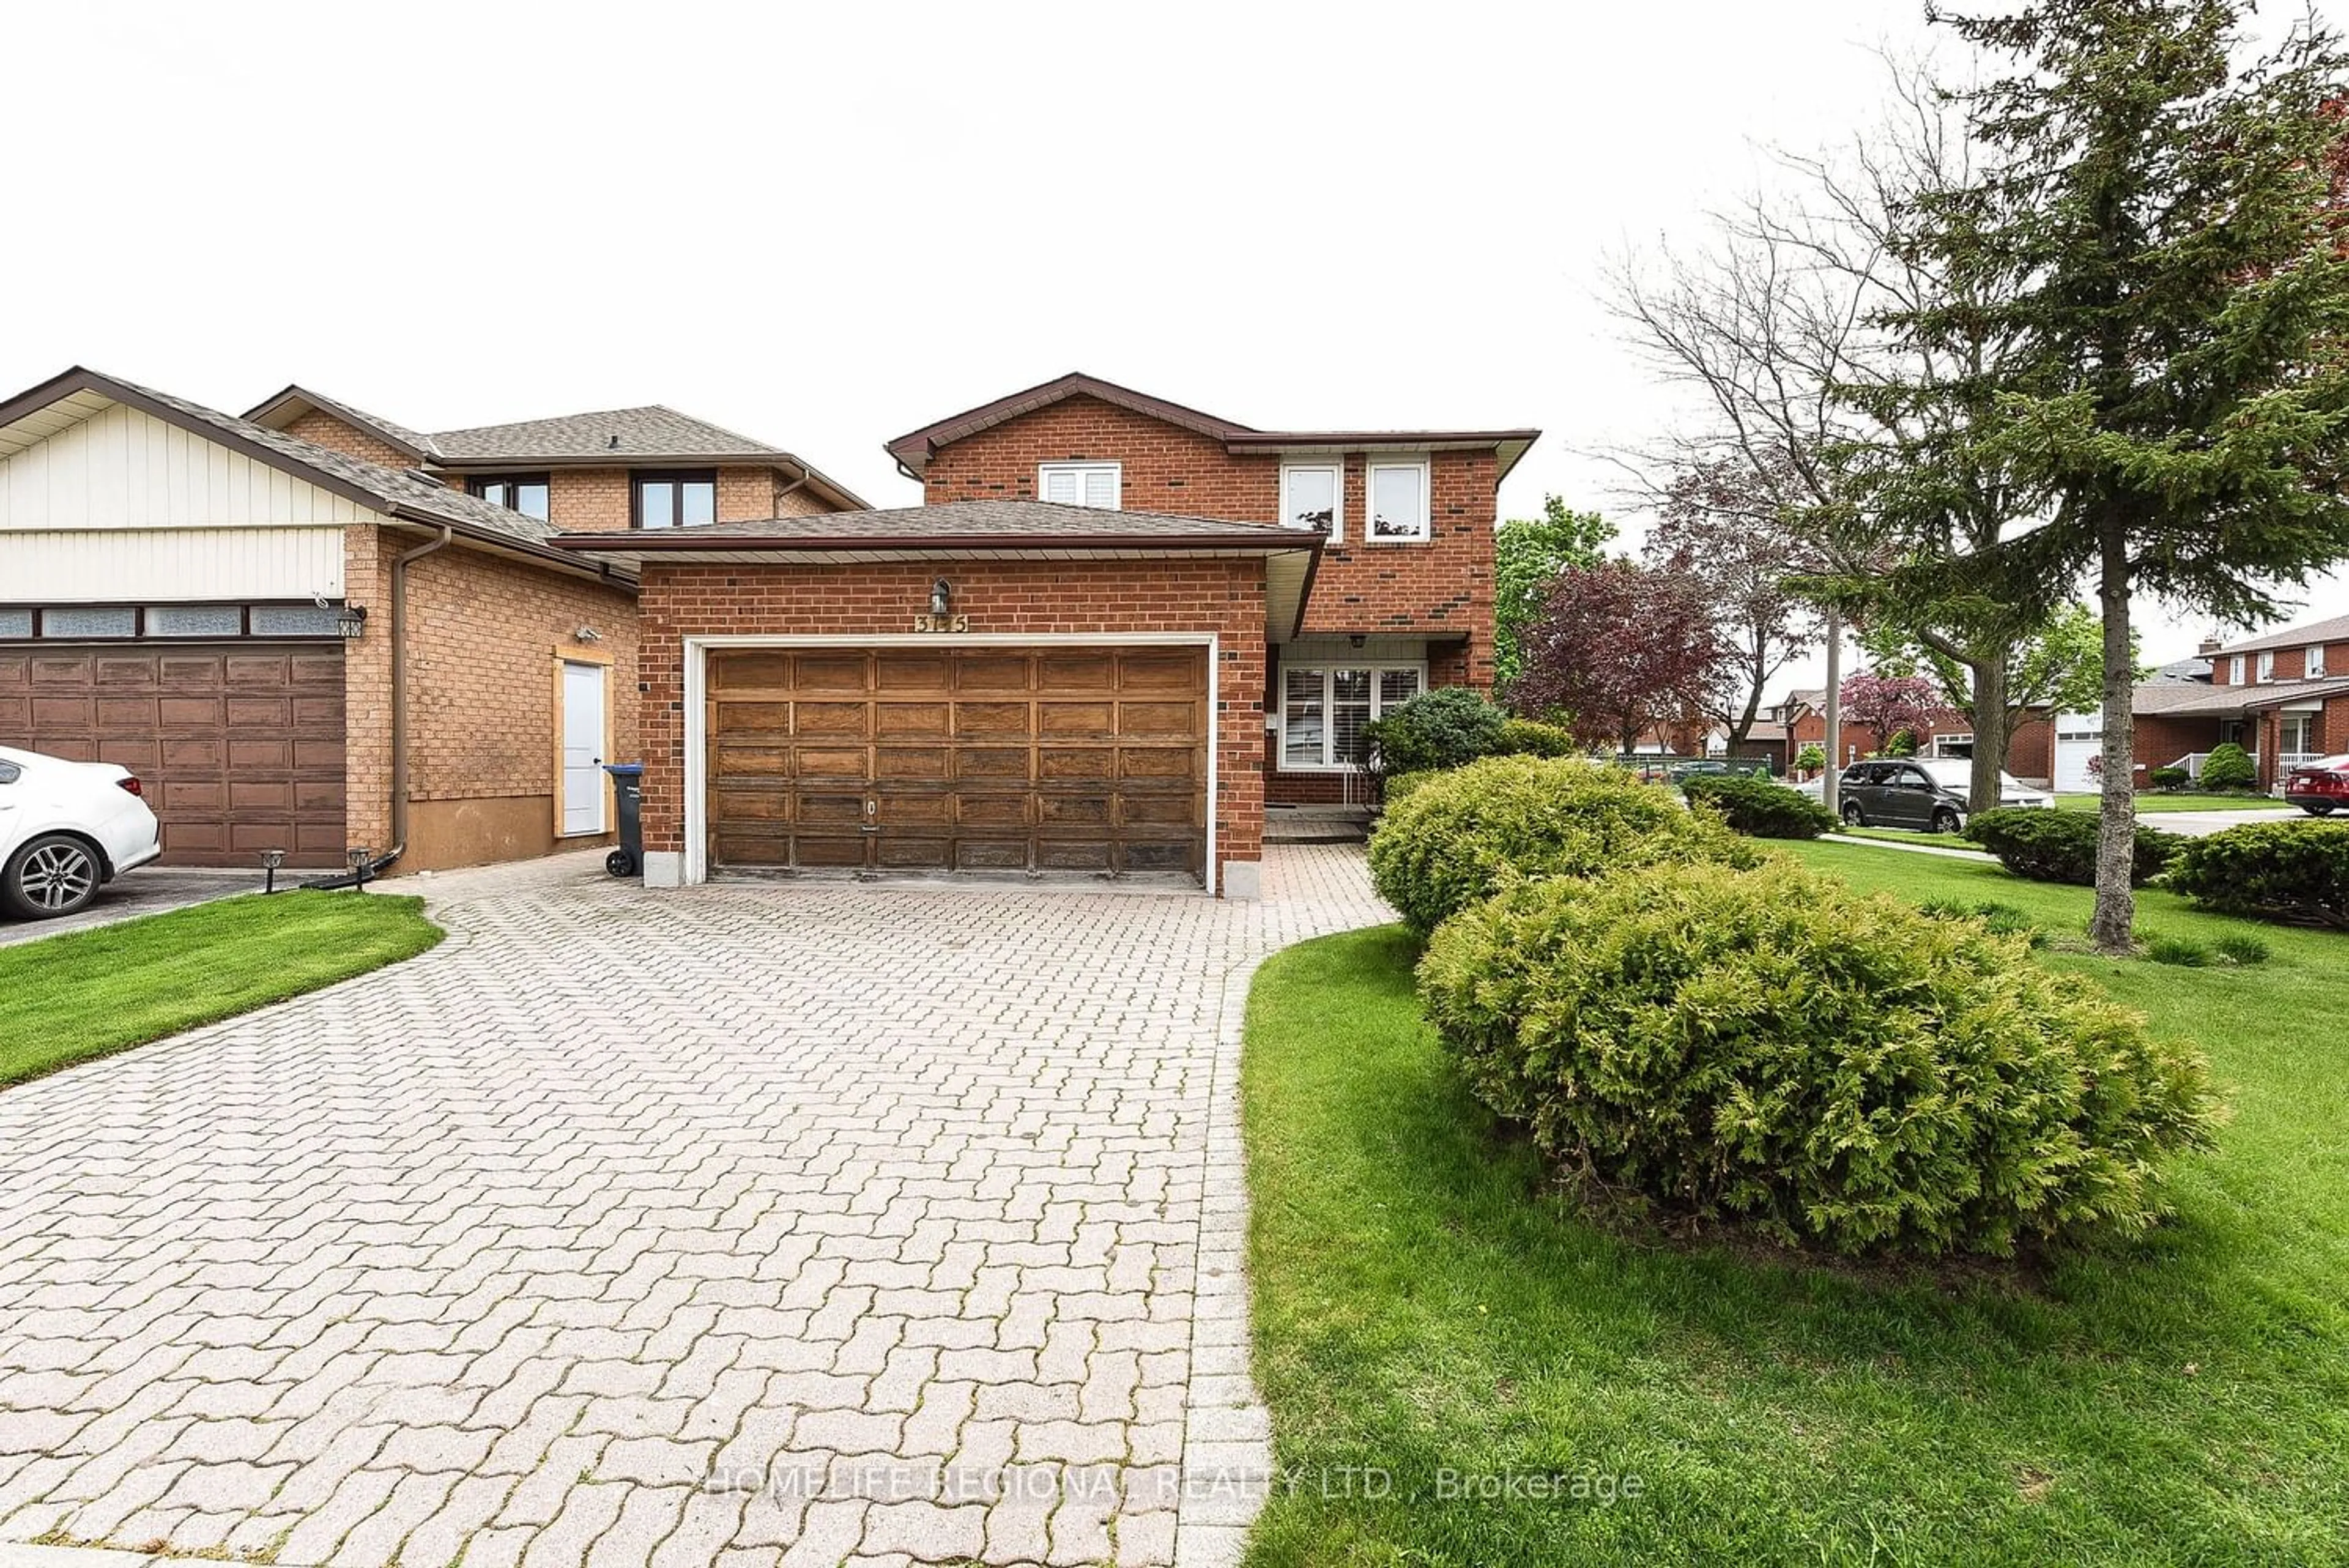 Home with brick exterior material for 3175 Fairfox Cres, Mississauga Ontario L4X 2V4